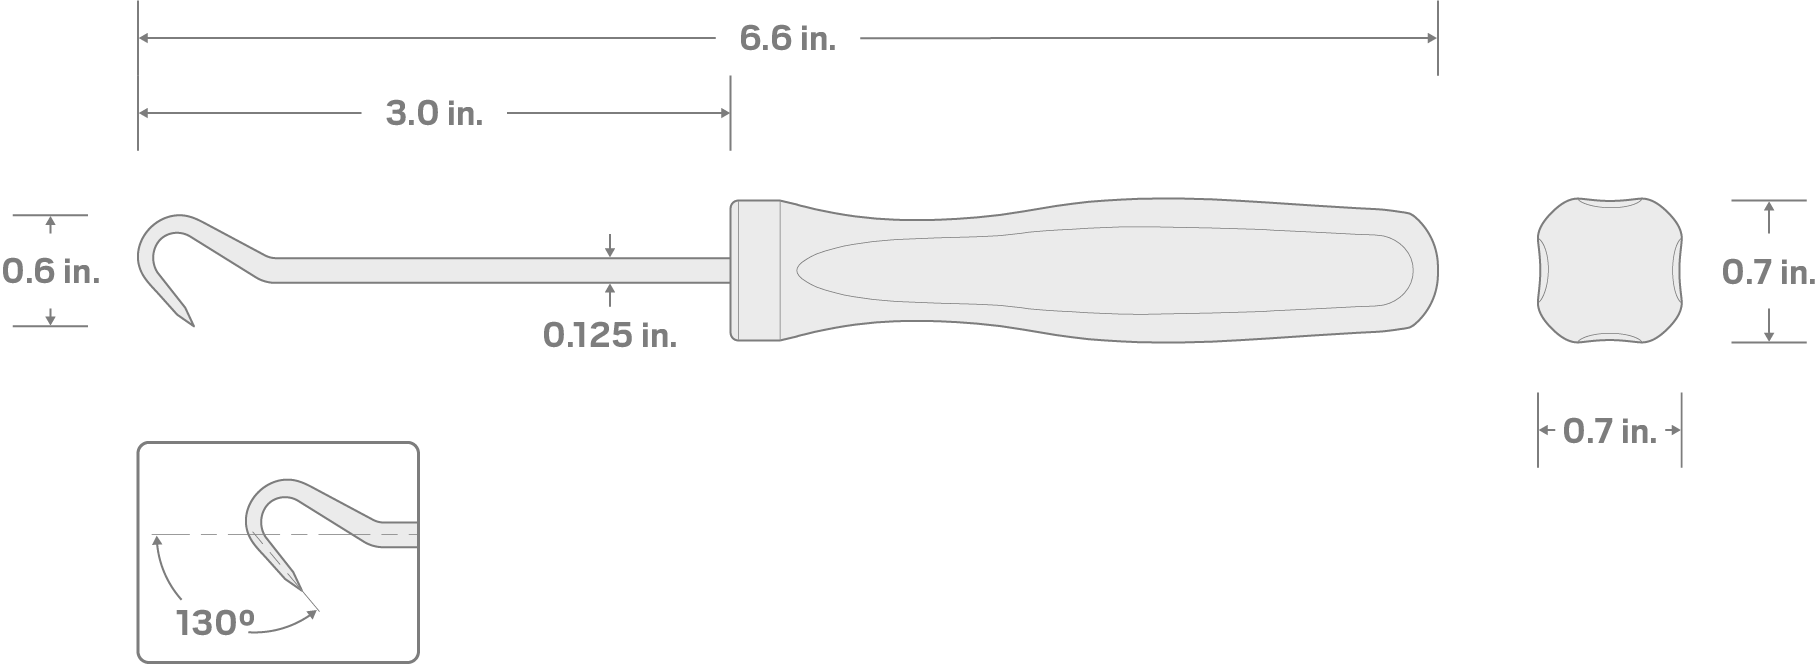 Specs for 130-Degree Hook (1/8 Inch x 3 Inch)